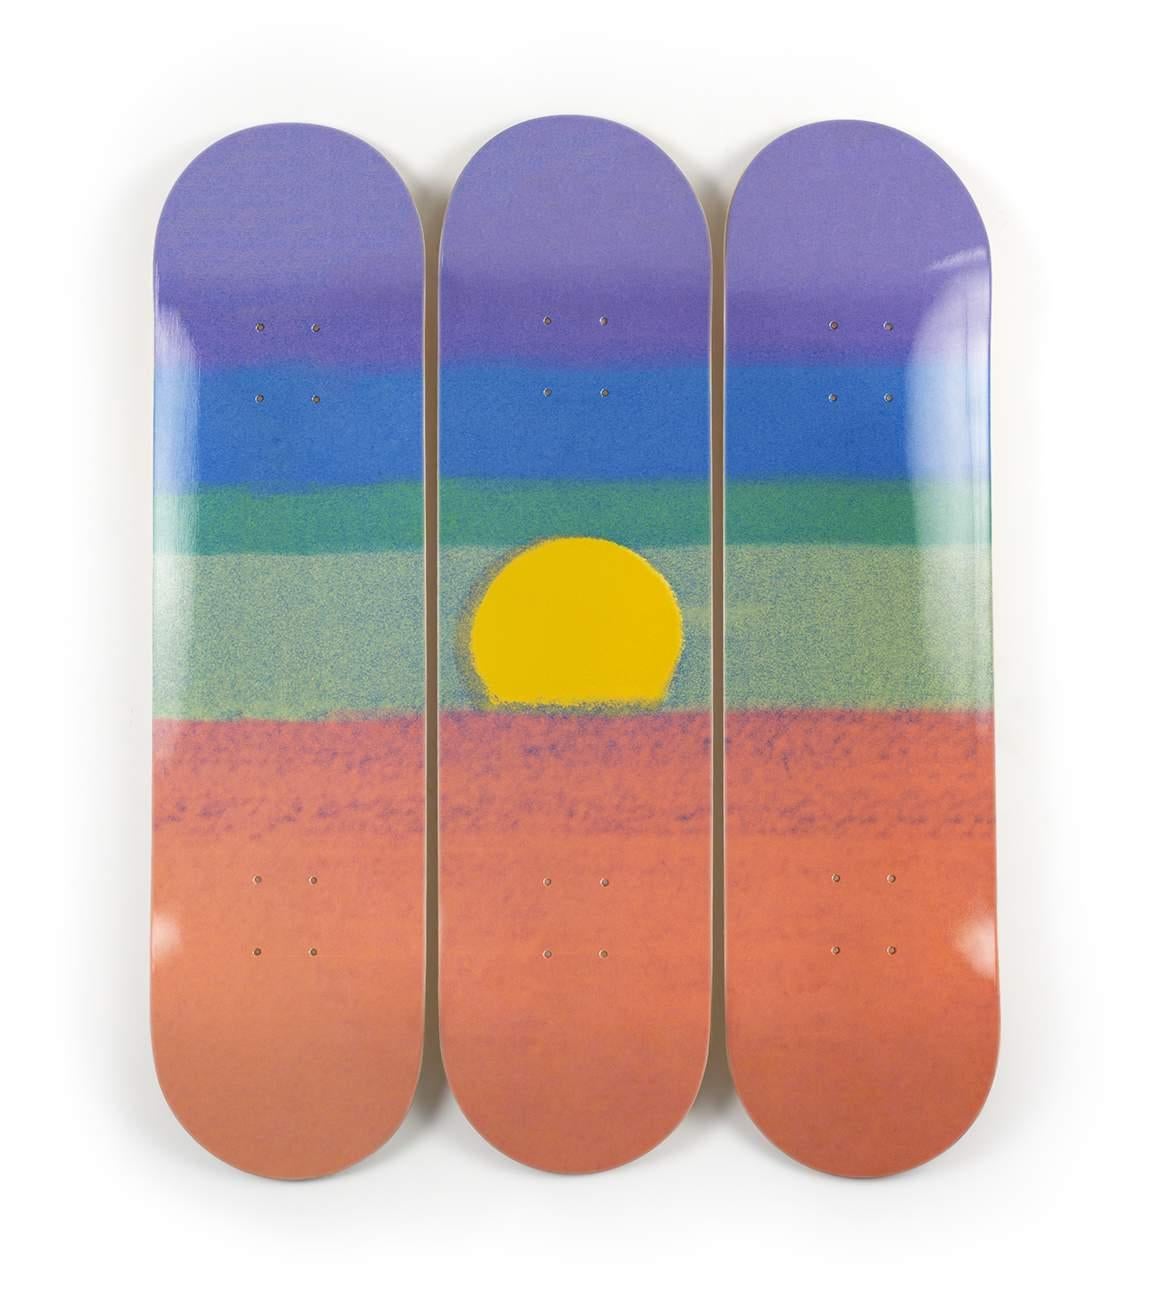 Andy Warhol - SUNSET (ORANGE)
Date of creation: 2019
Medium: Digital print on Canadian maple wood
Edition: 500
Size: 80 x 20 cm (each skate)
Condition: In mint conditions and never displayed
This work is formed by three skate decks made of 7 ply